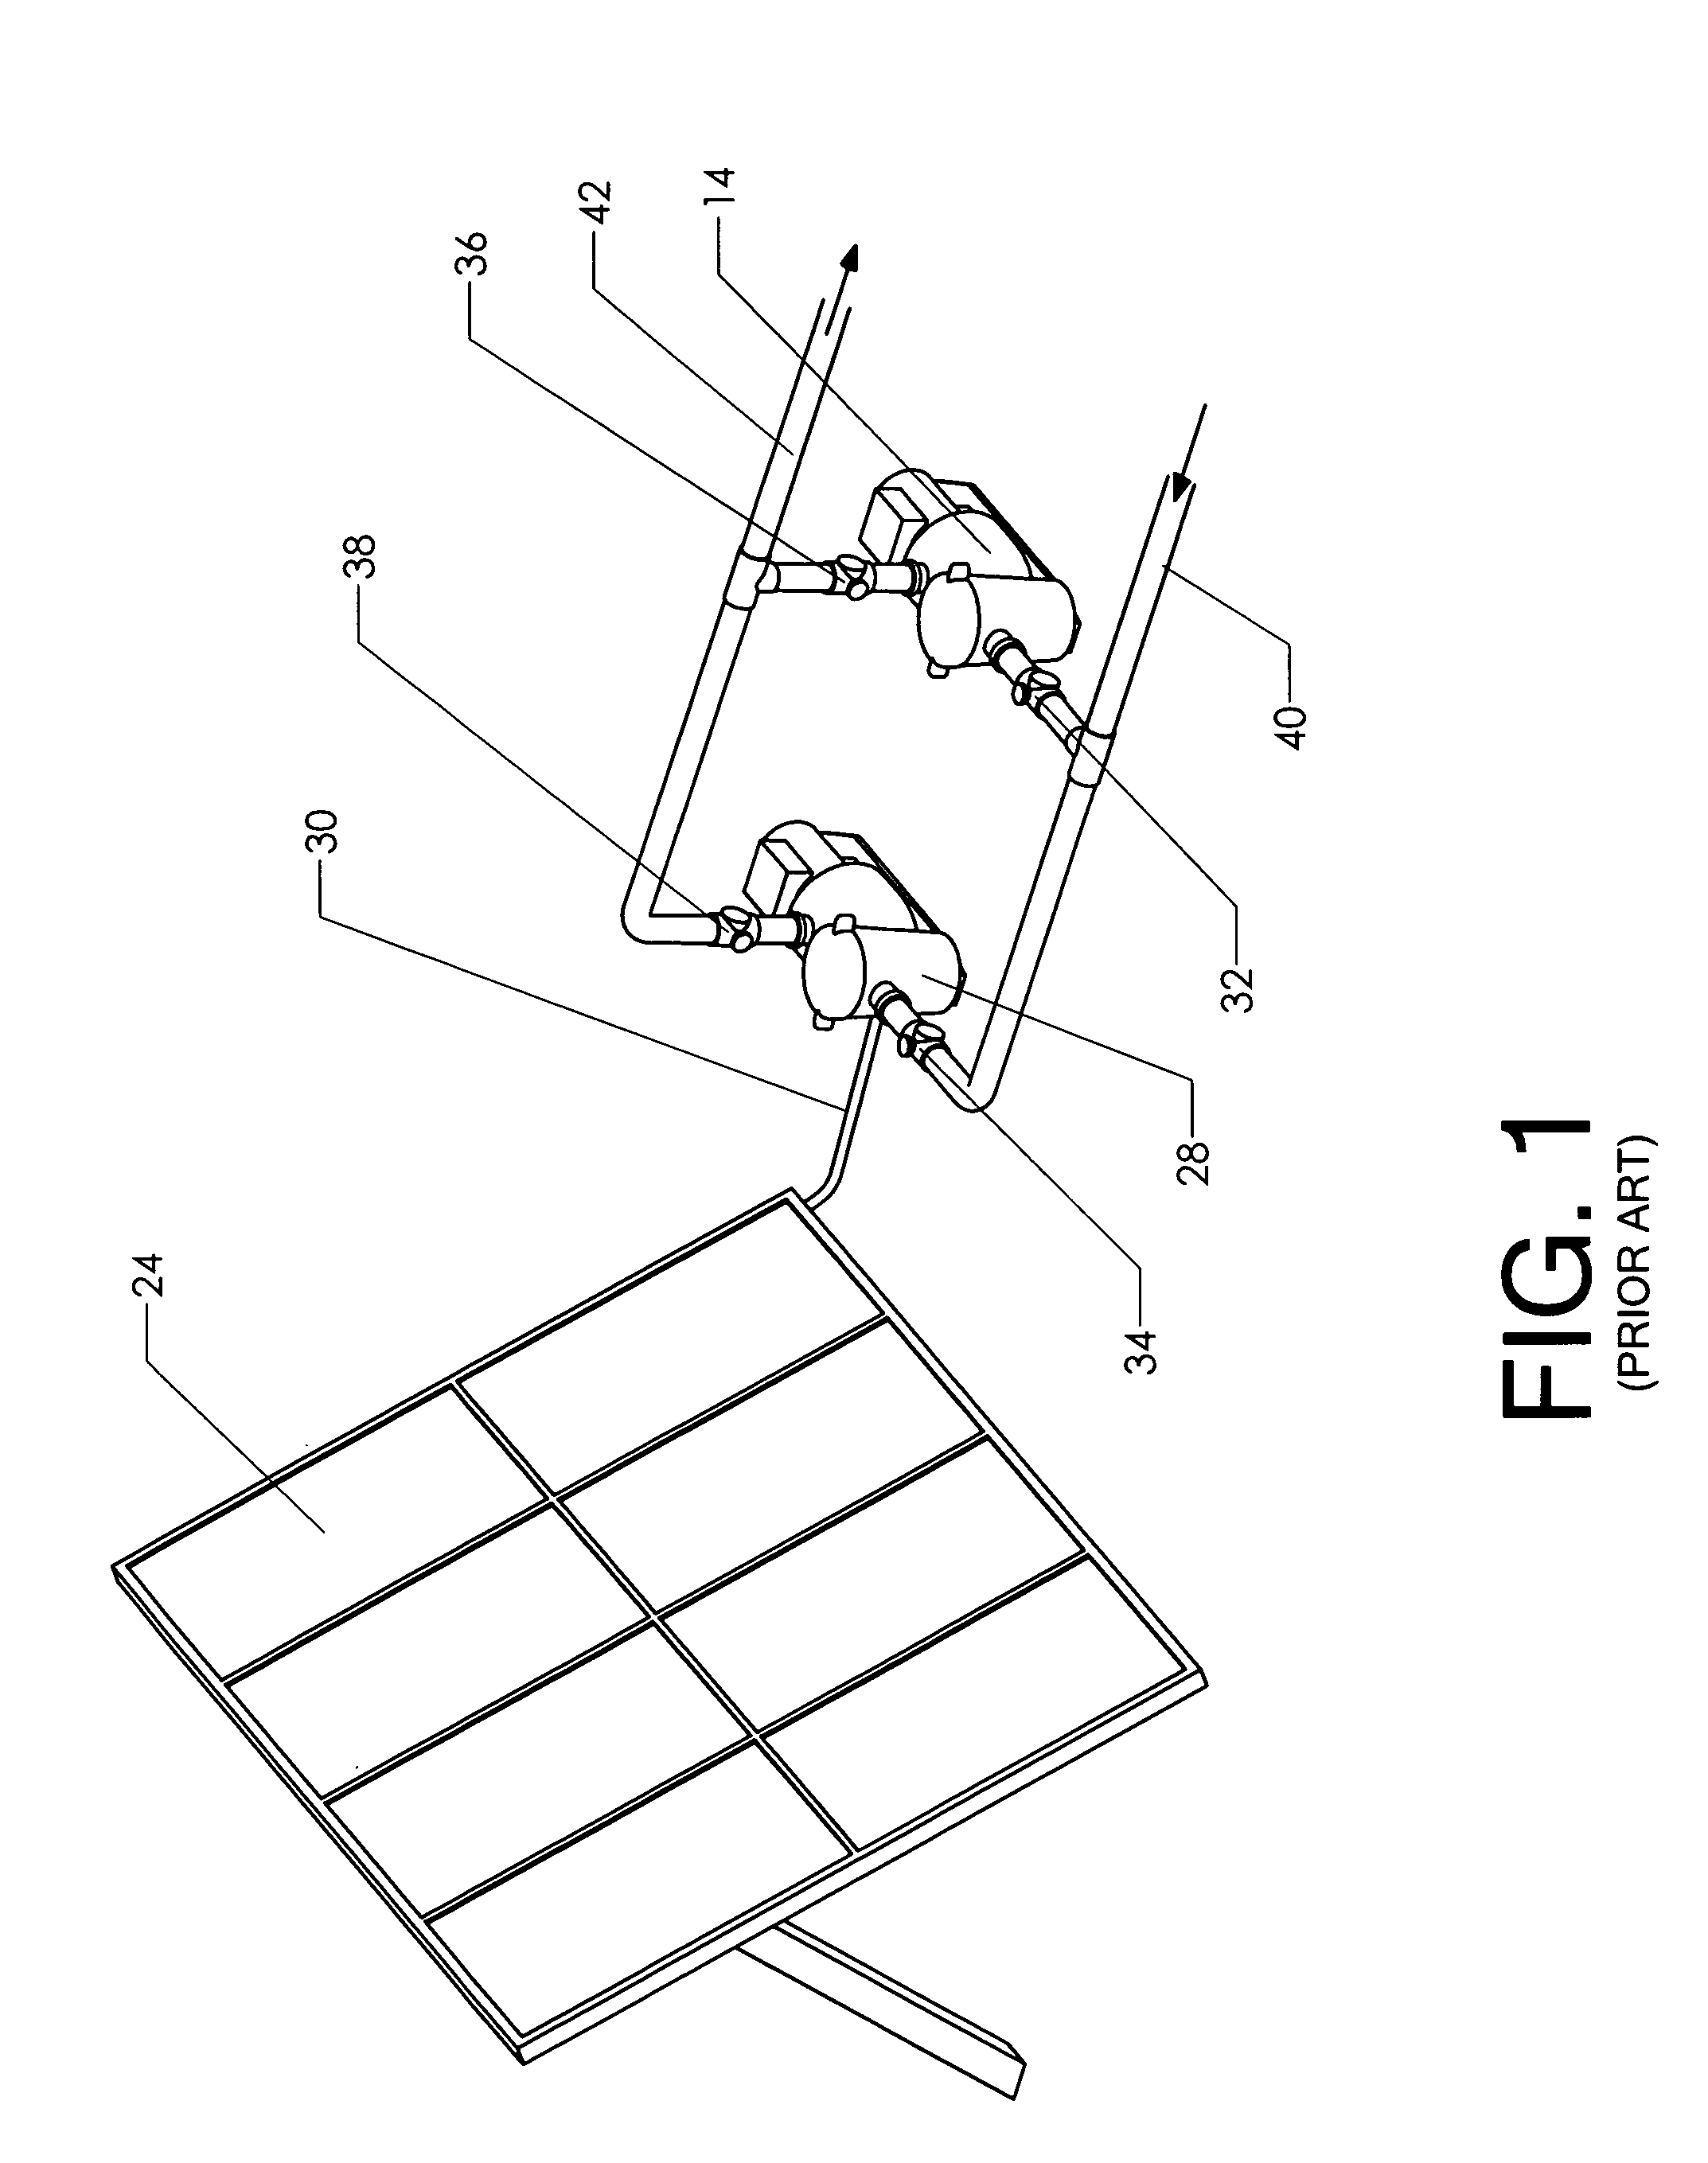 Energy production and consumption matching system